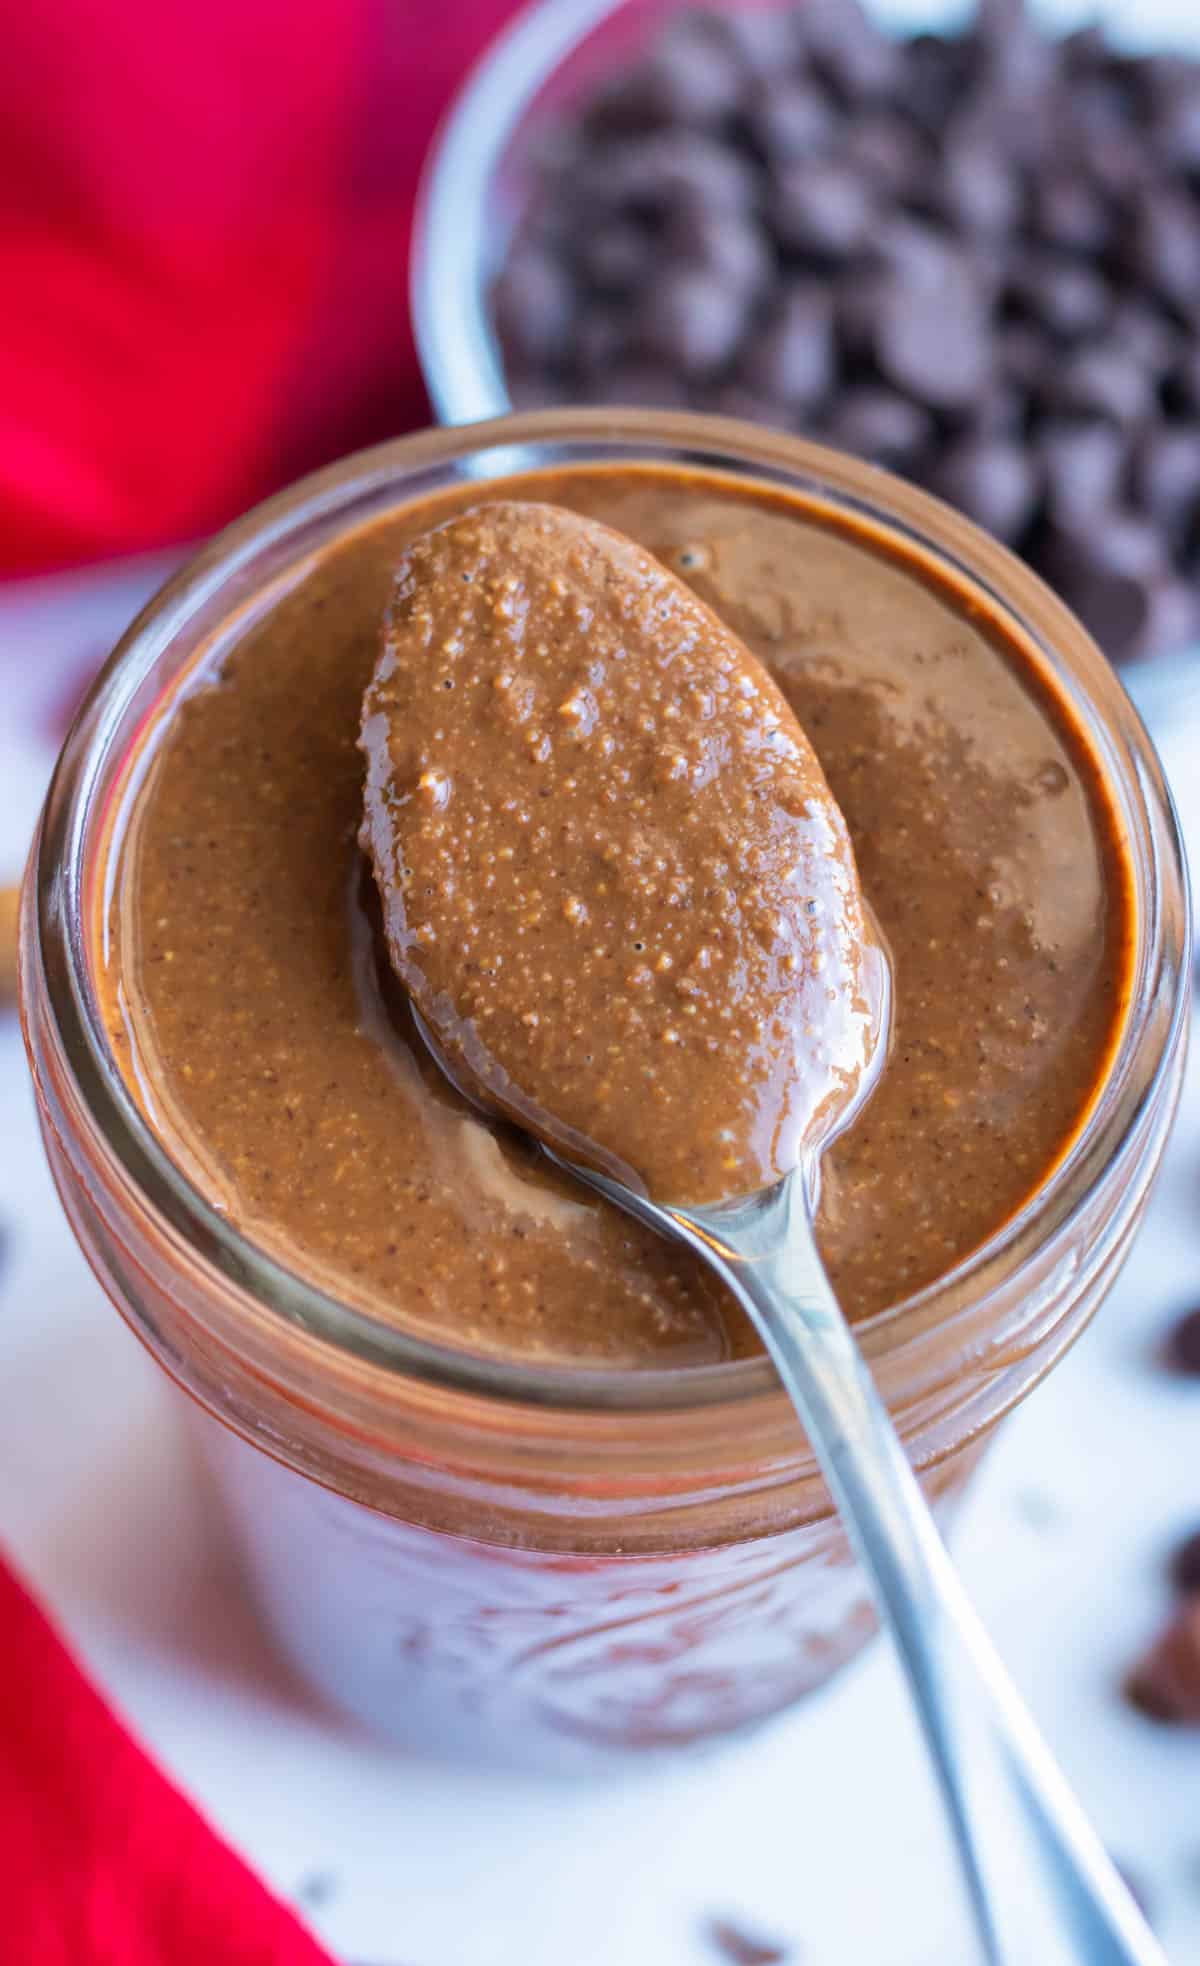 Homemade nutella is lifted up by a spoon for a healthy dessert spread.